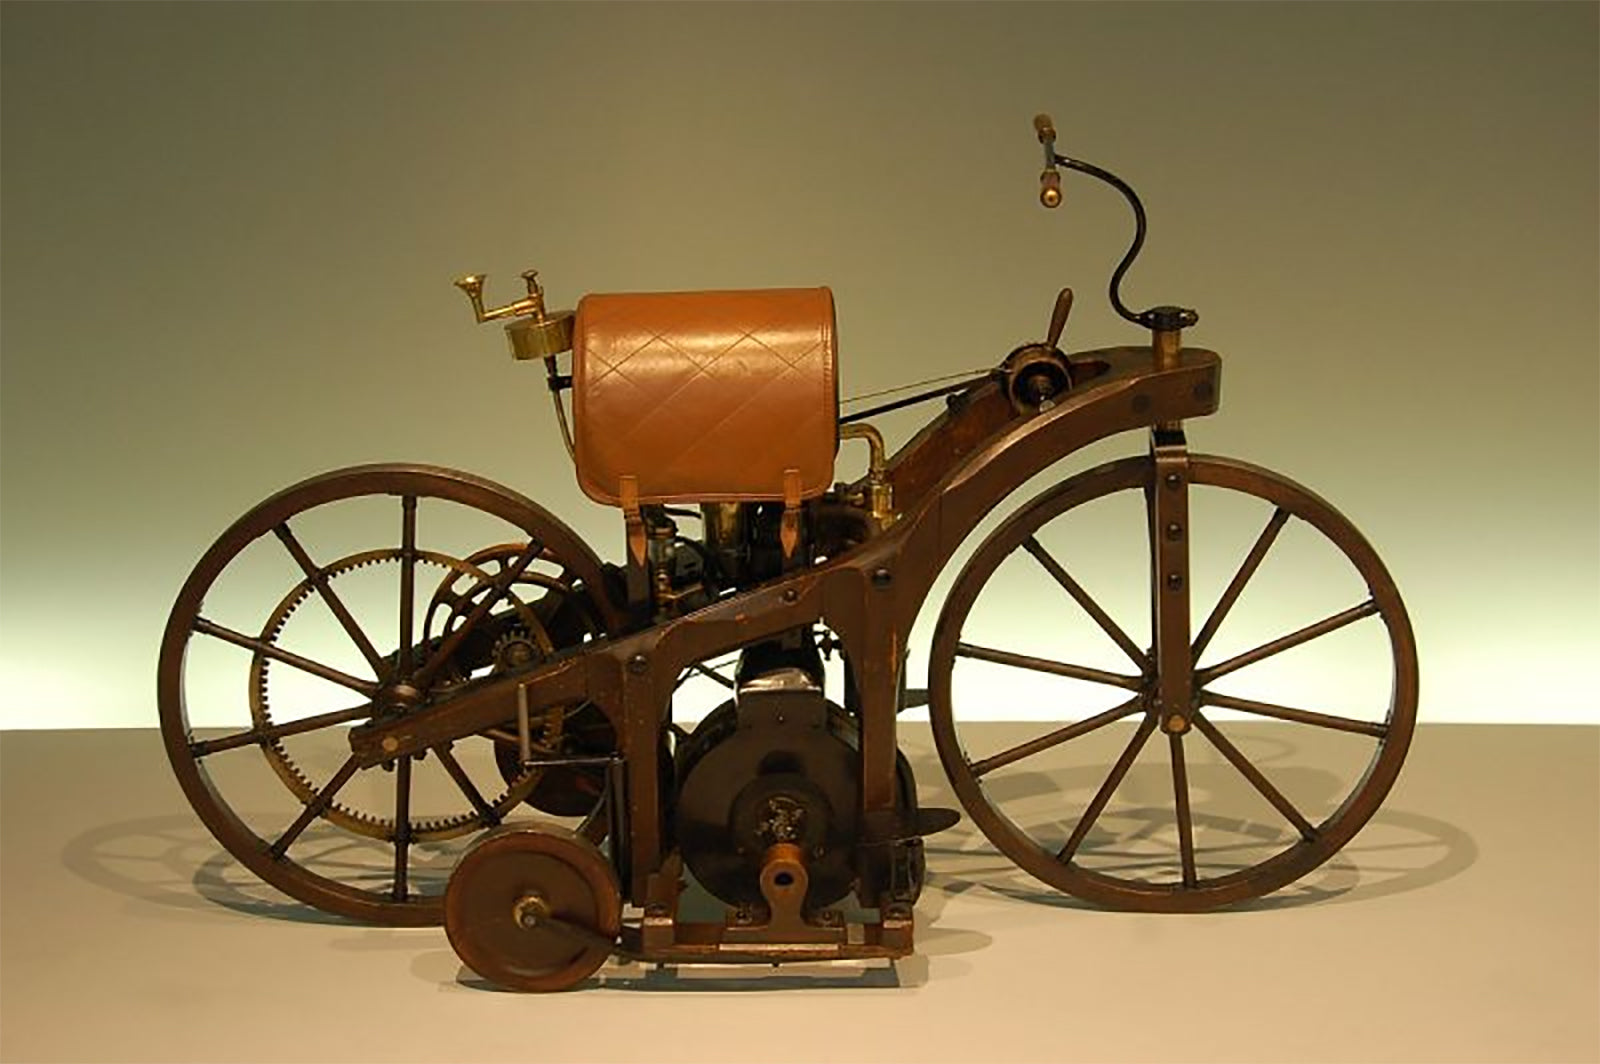 The Replica of first combustion engine motorcycle